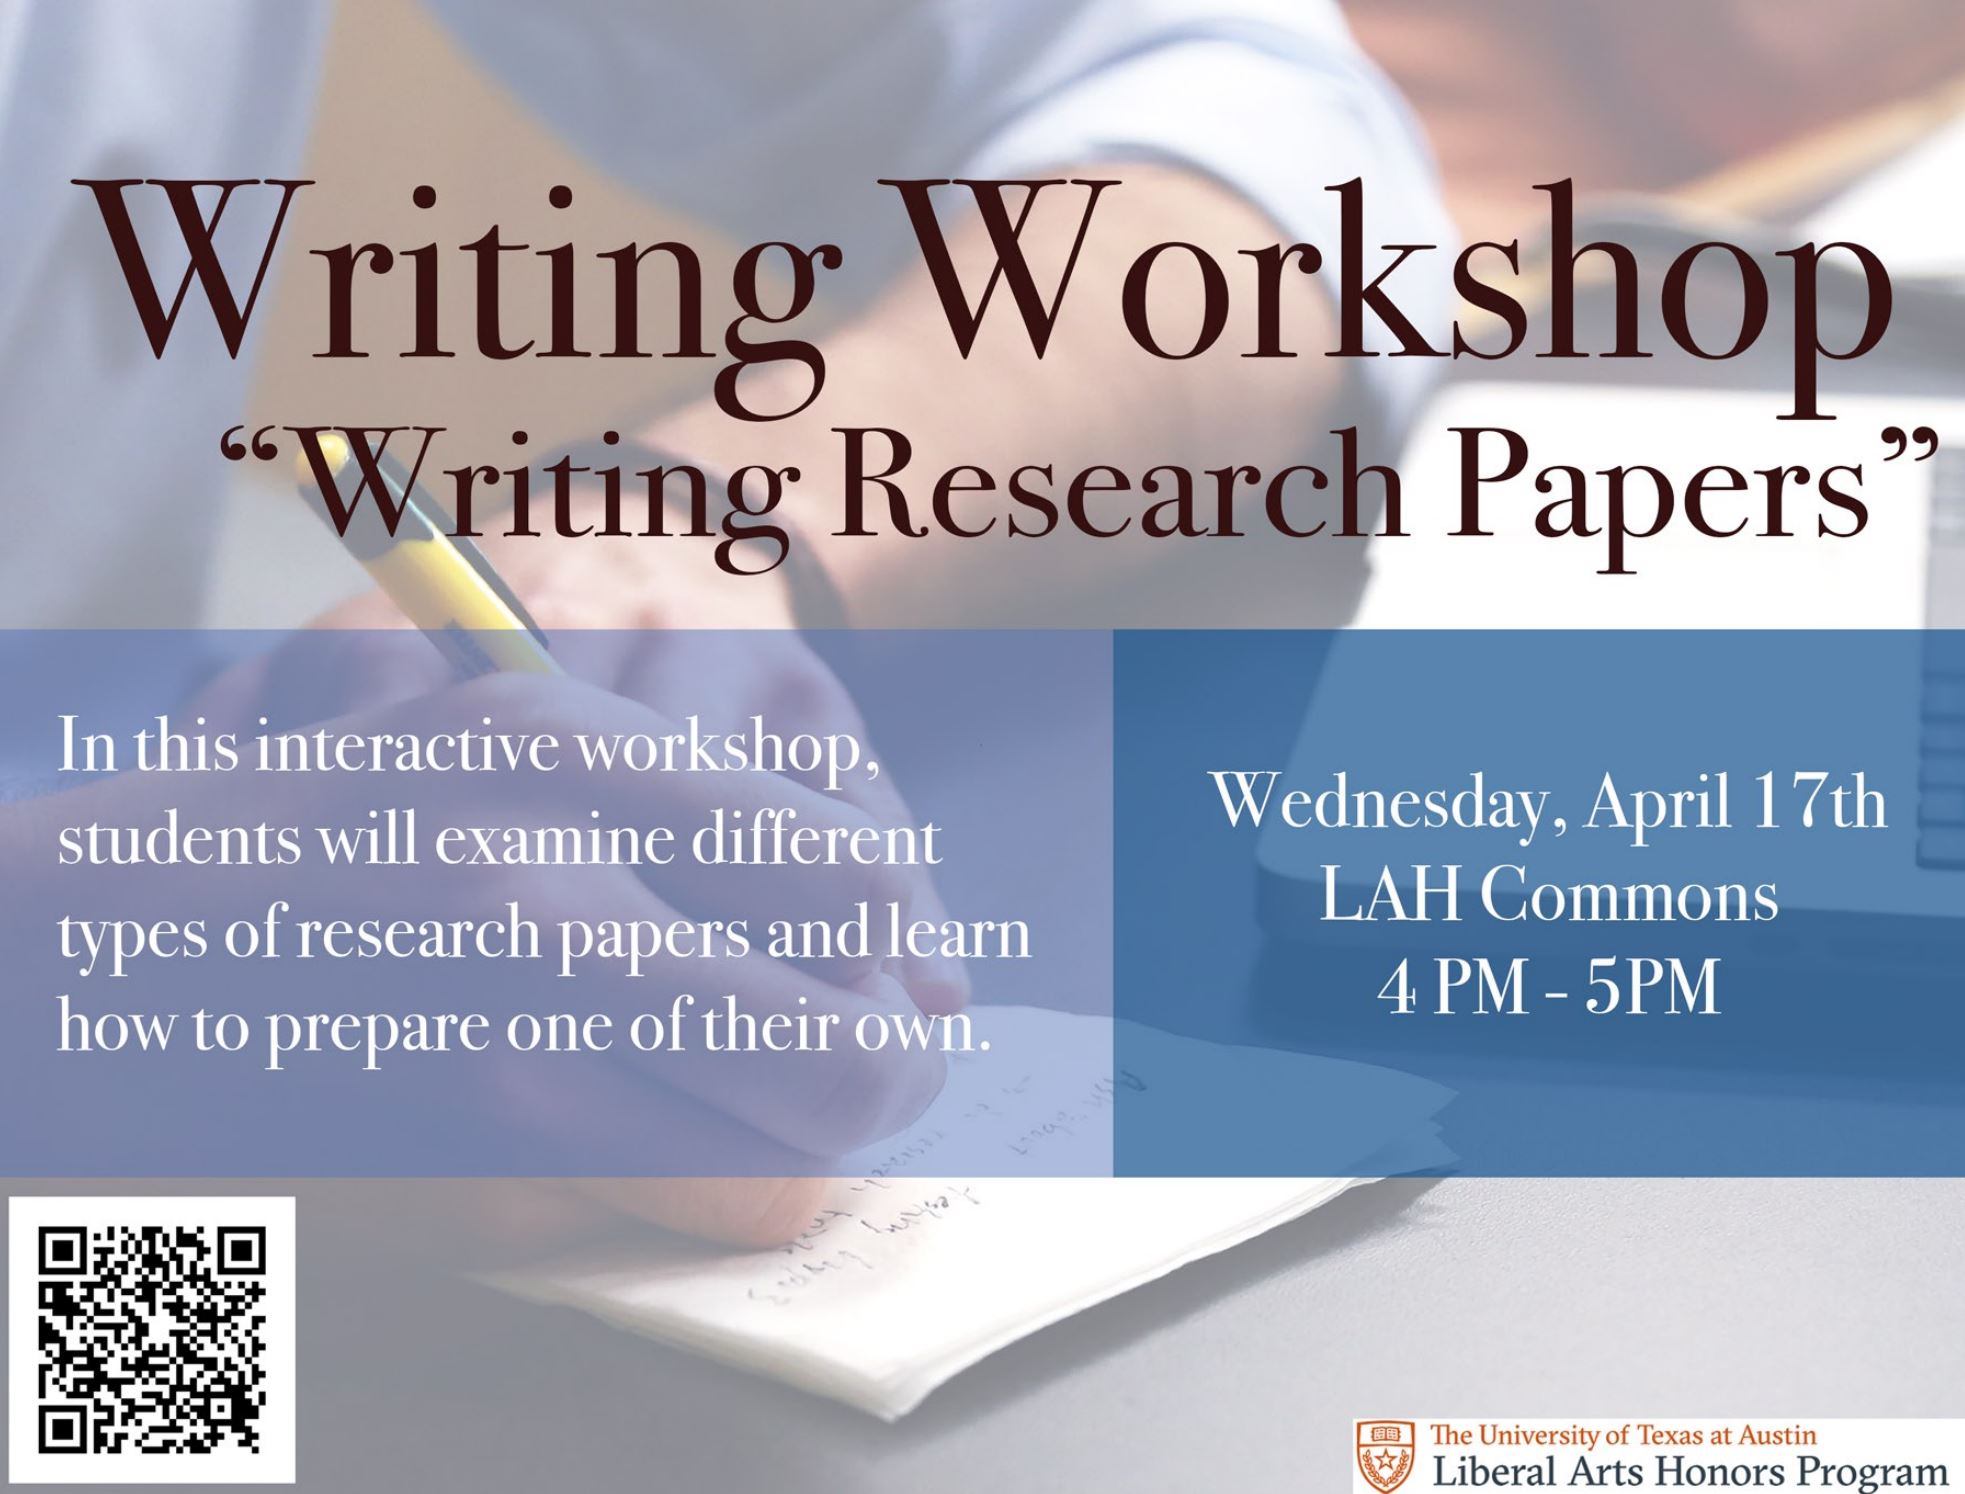 workshop on research paper writing 2023